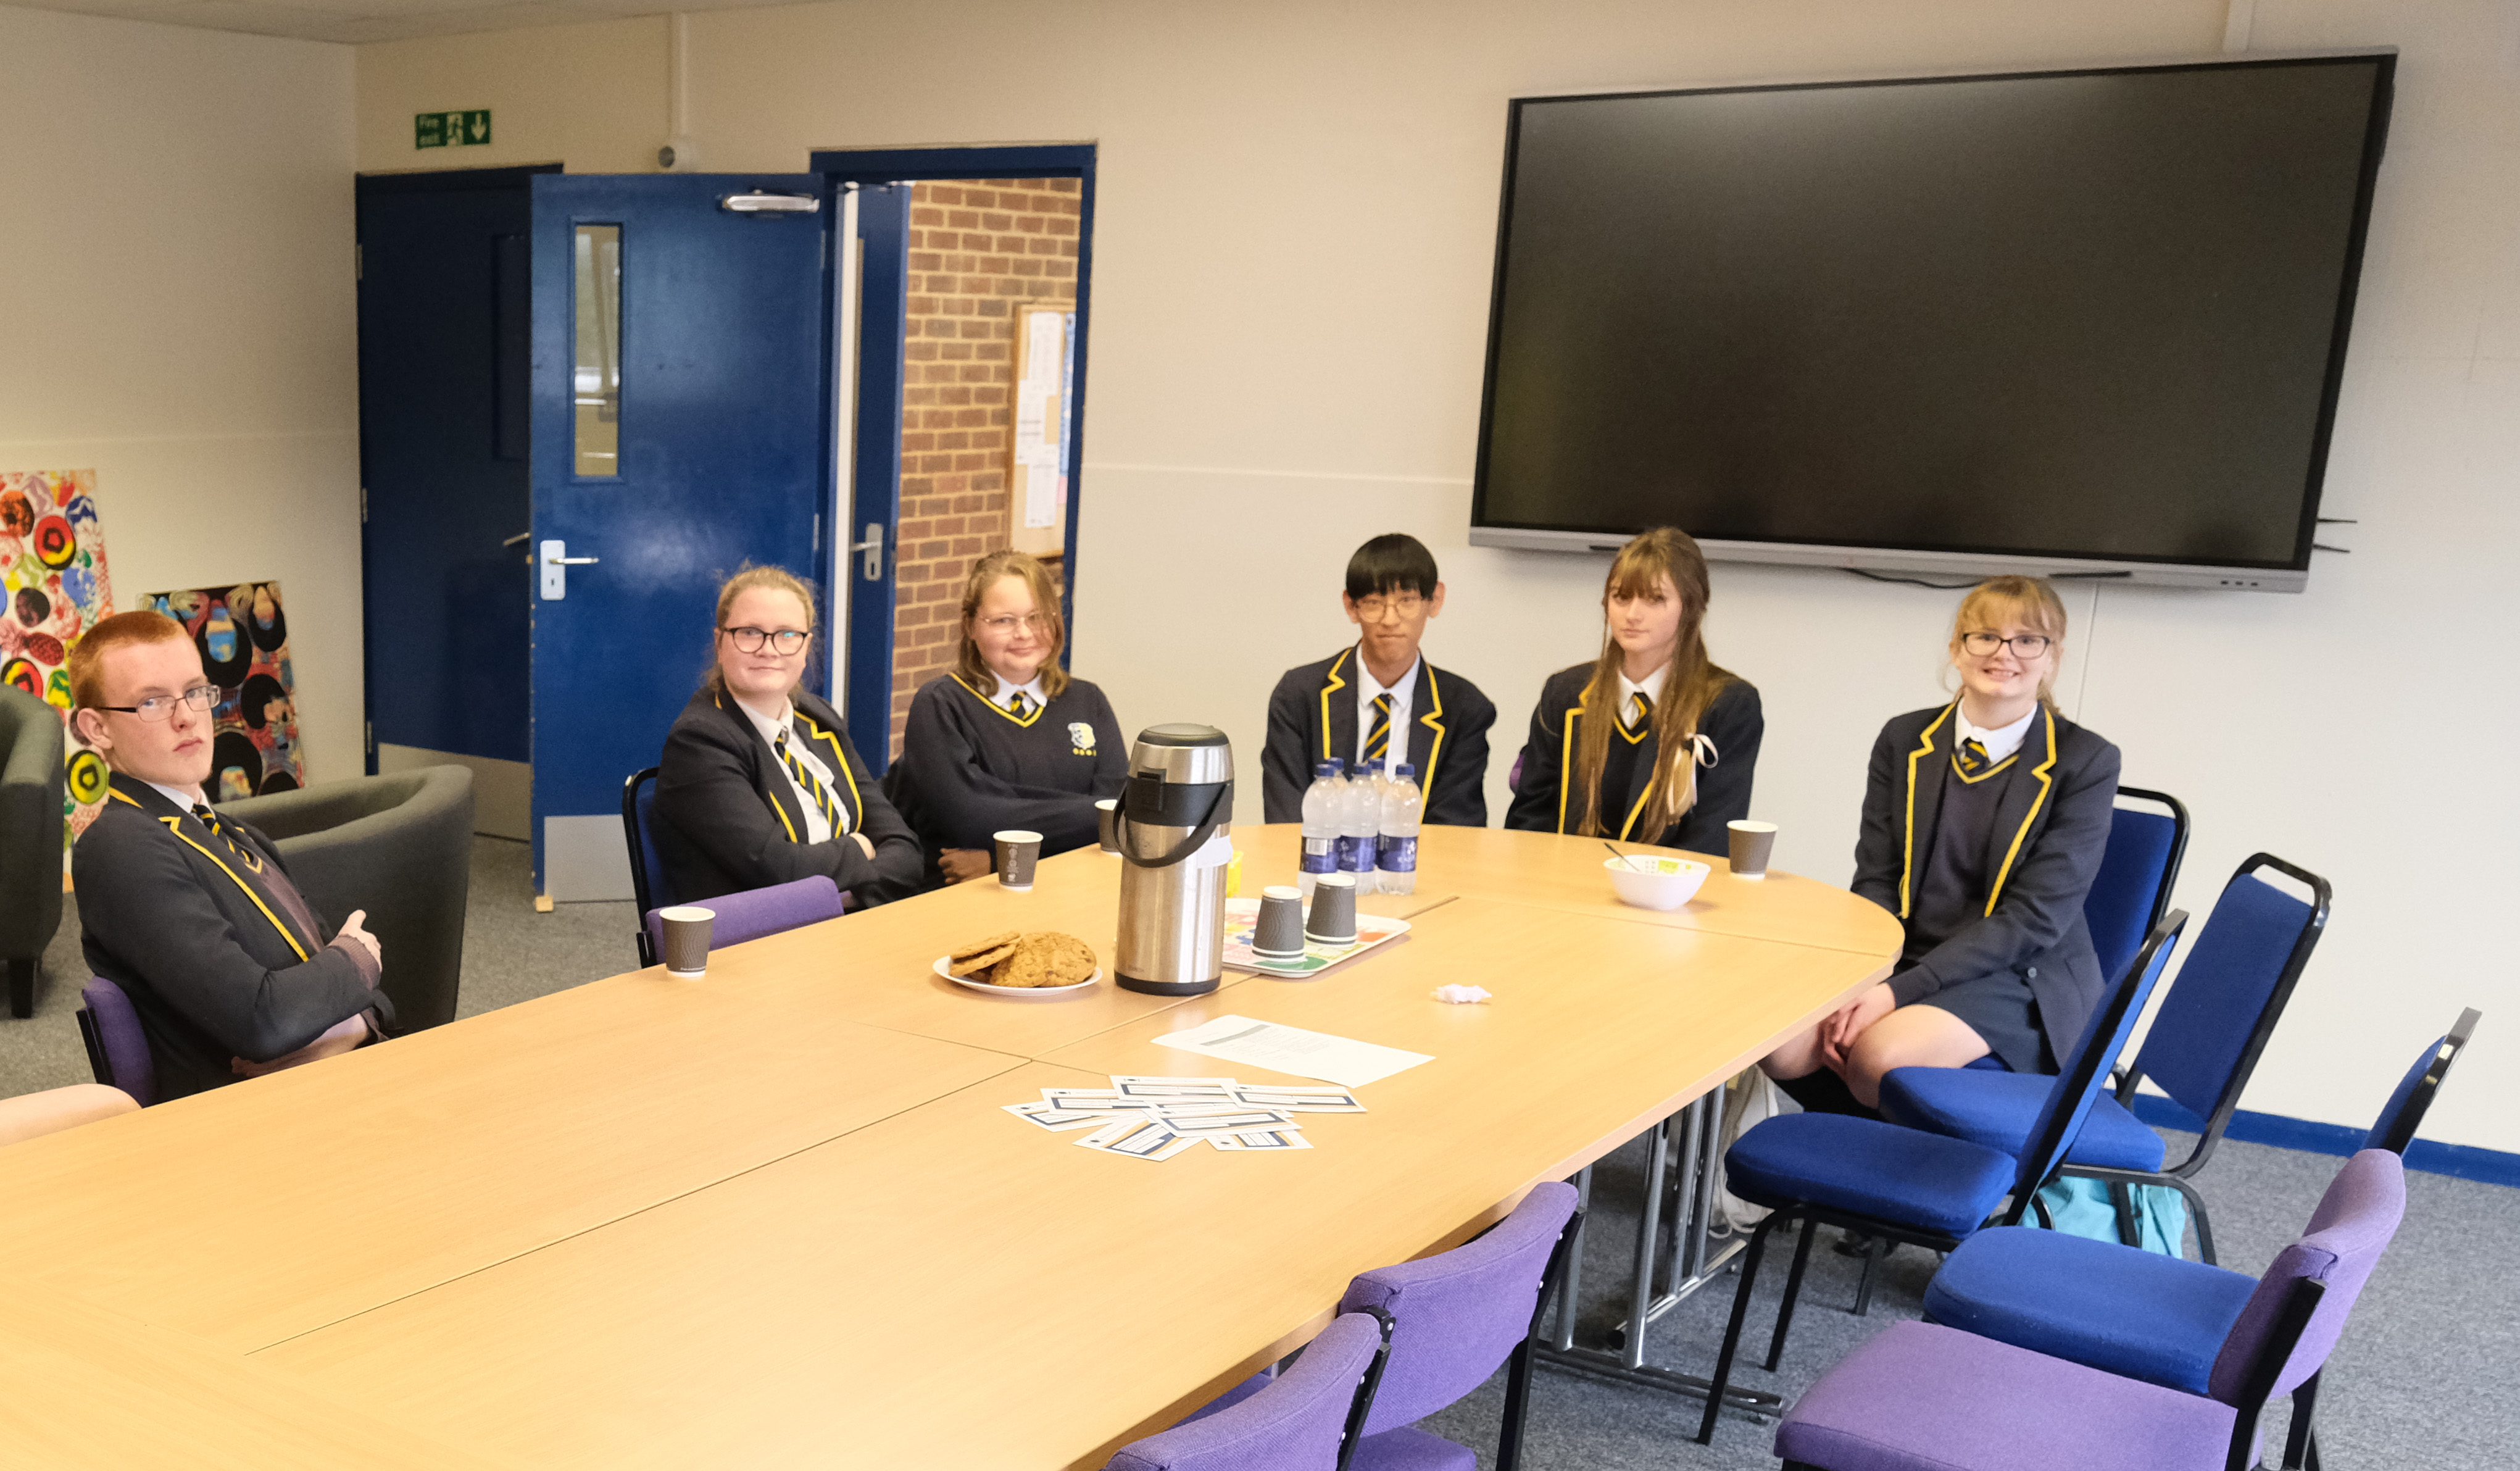 Image for news item 'Year 11 students celebrate excellence having Hot Chocolate with the Head.'